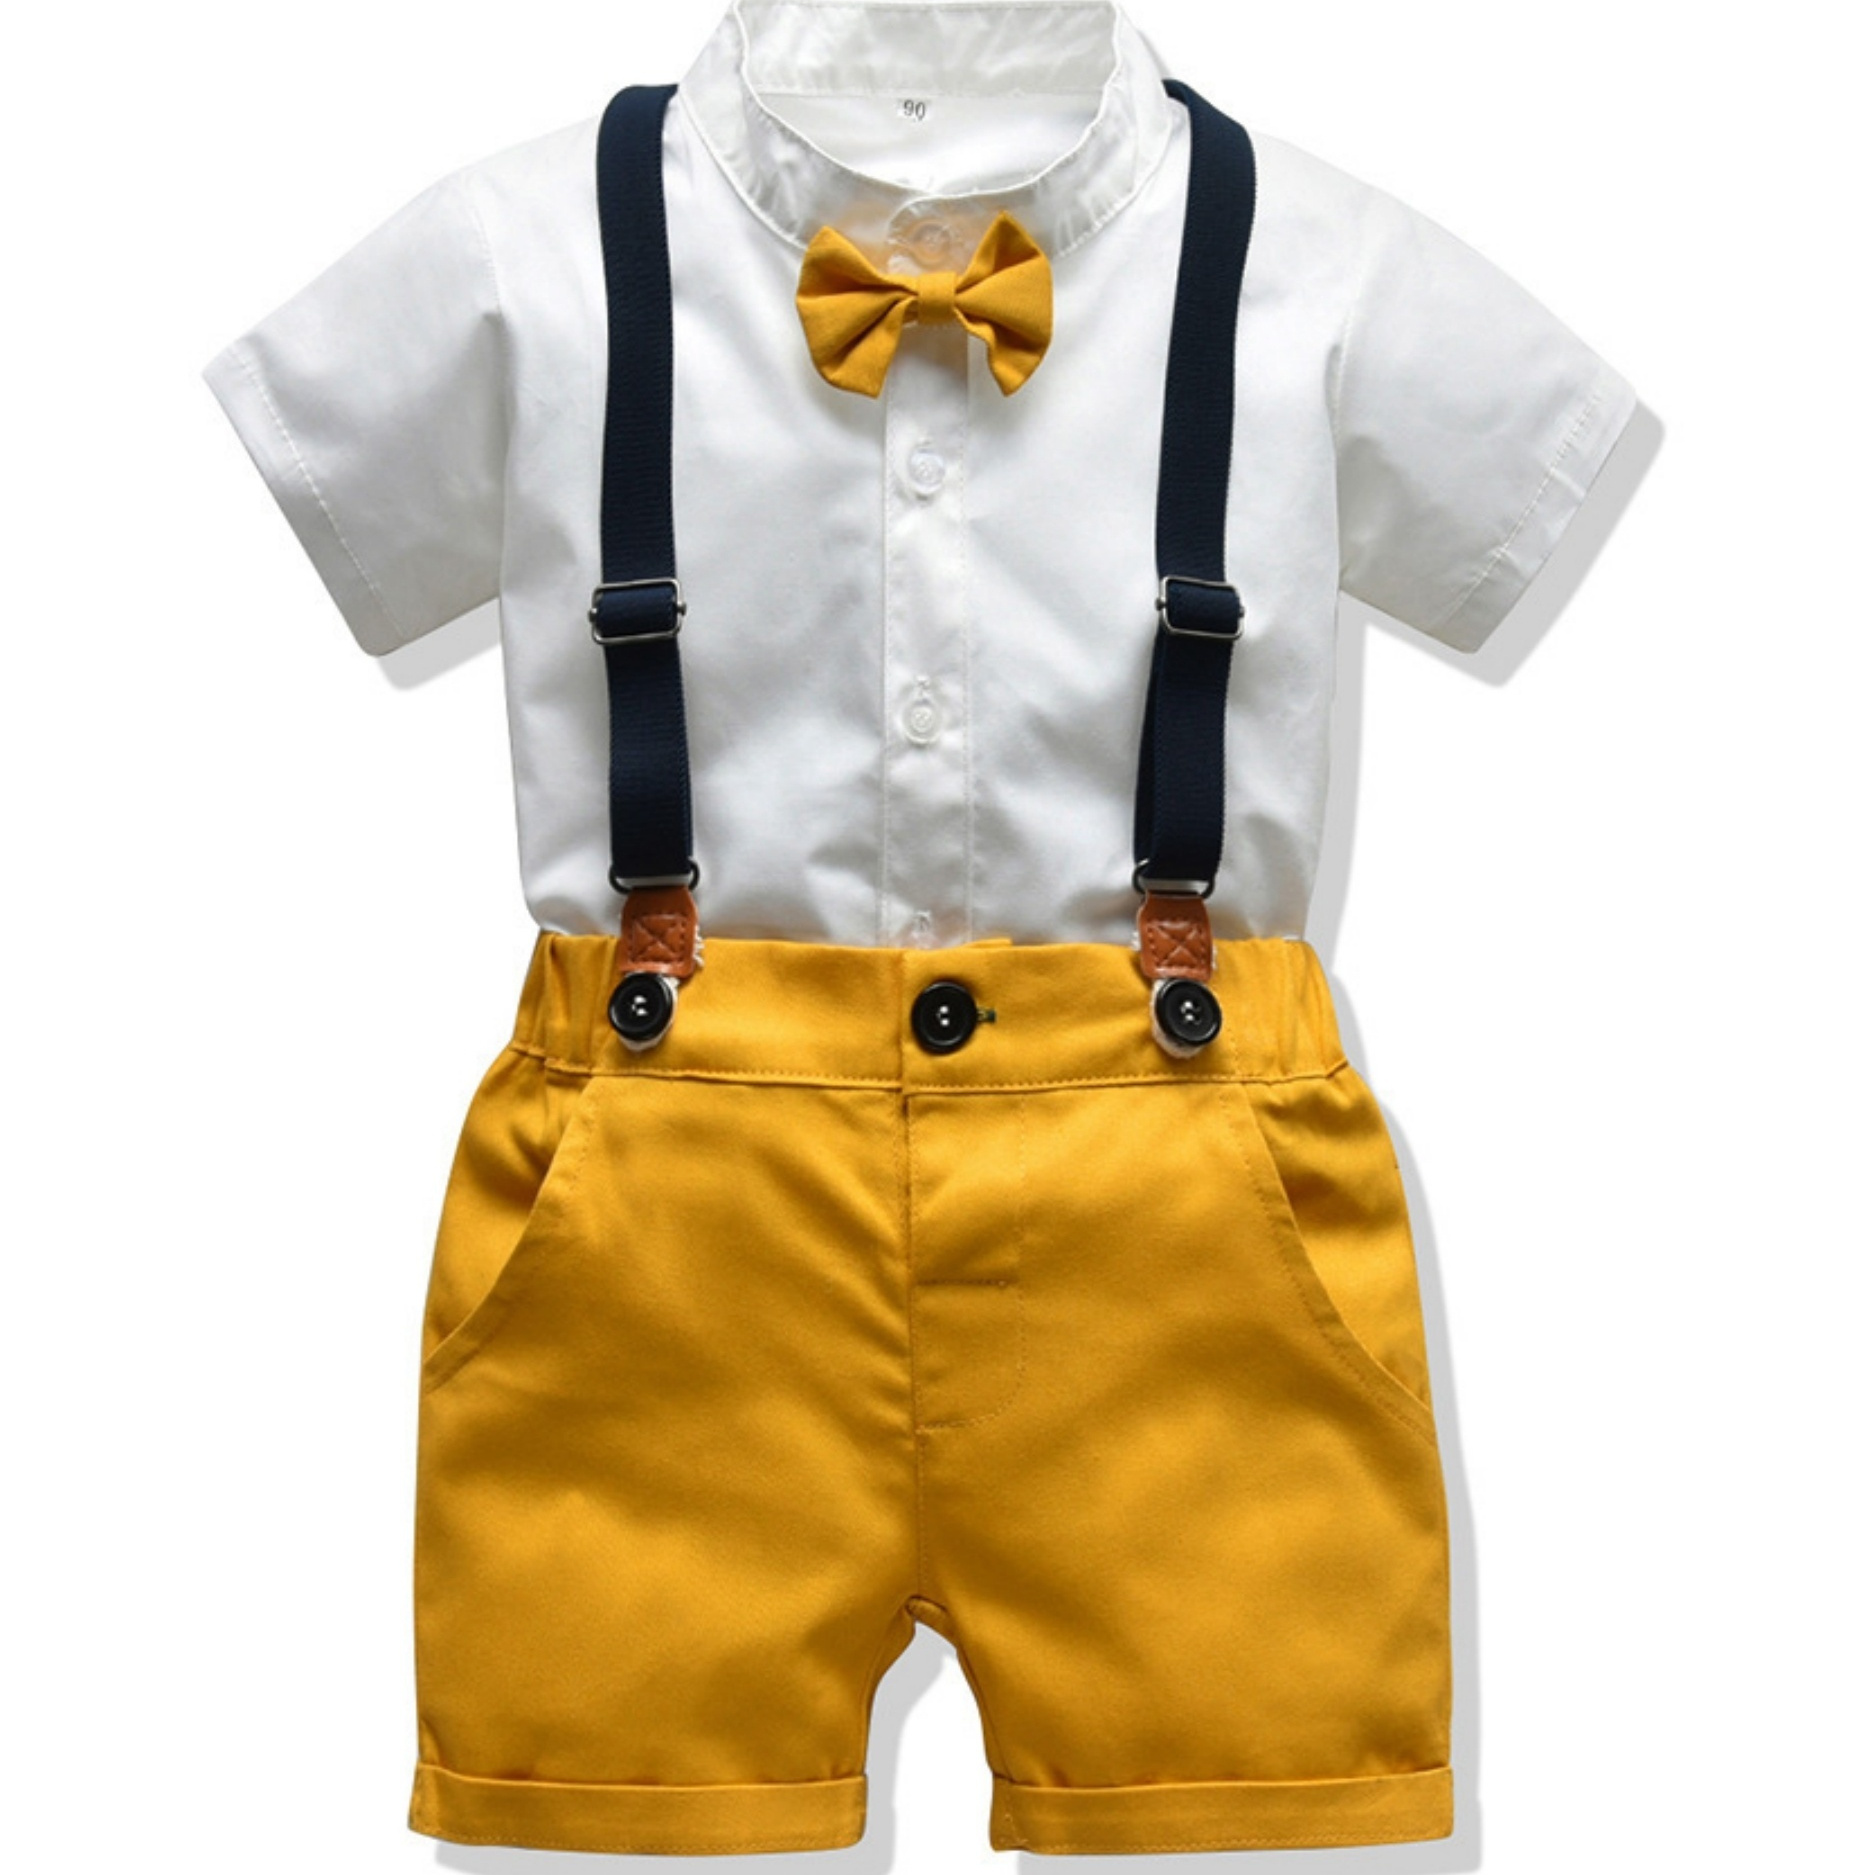 

95% Cotton 4pcs, Solid Color Collar Shirt + Shorts + Suspenders + Bow Tie Set For Boys, Comfortable Formal Dress Birthday Gift Host Wear